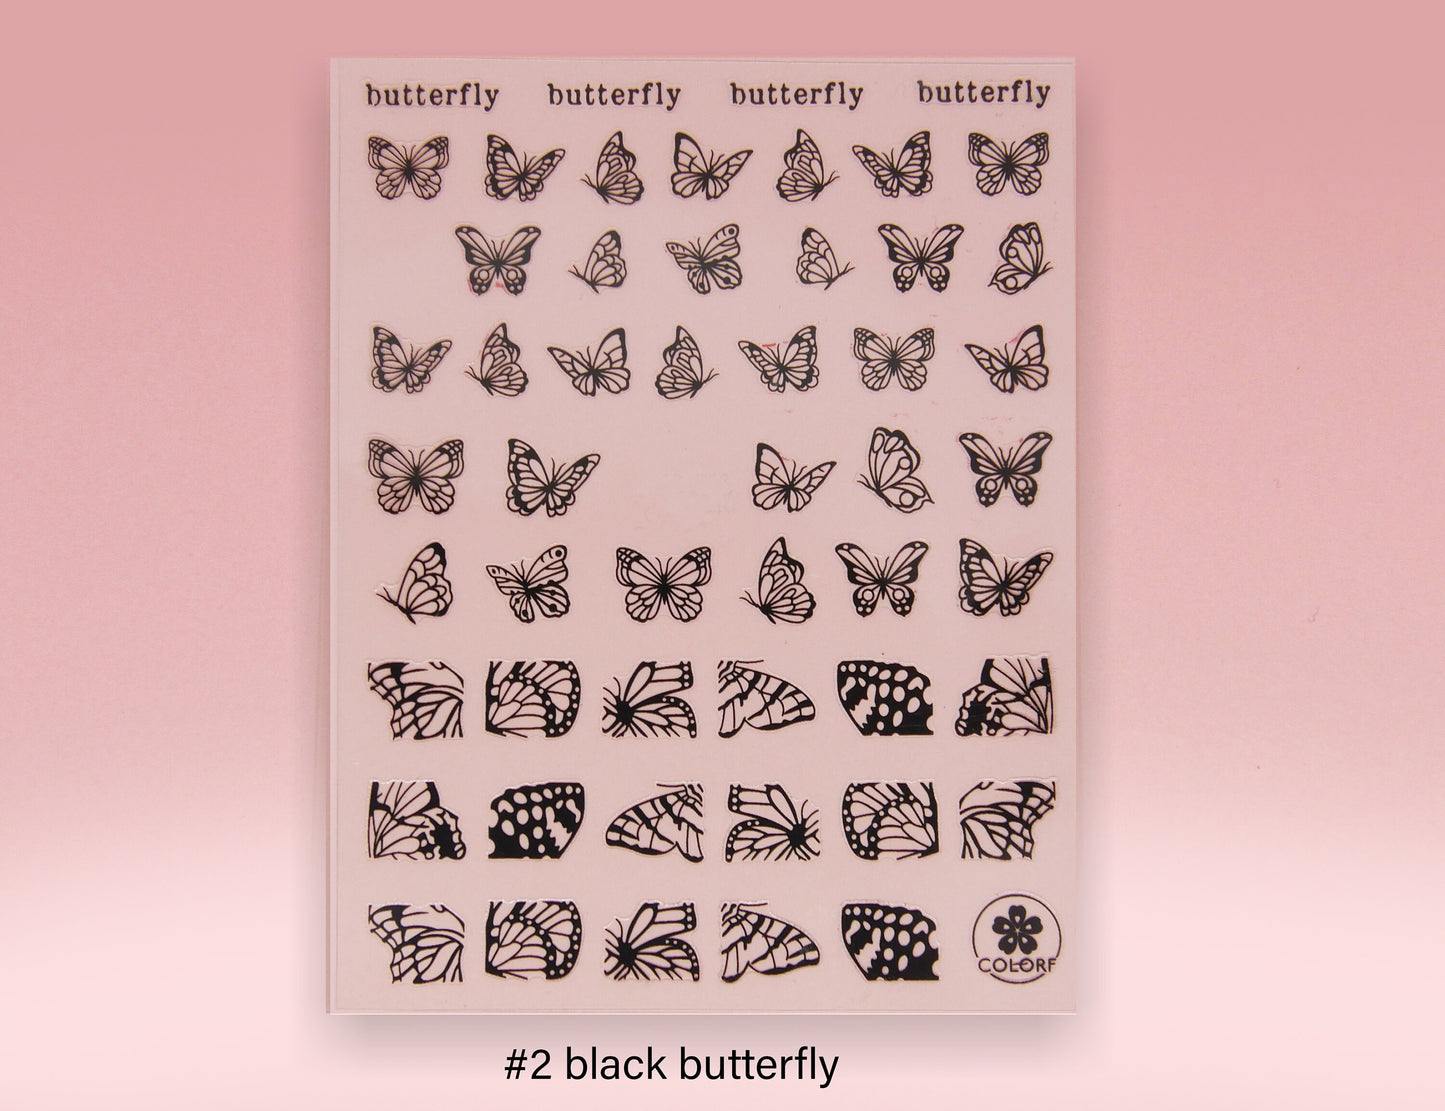 Butterflies floral nail sticker/ Fairy tale Unicorn Star Stickers Self Adhesive Decals/ Nail Art Supplies Nail Decos Peel Off Instagram Nail